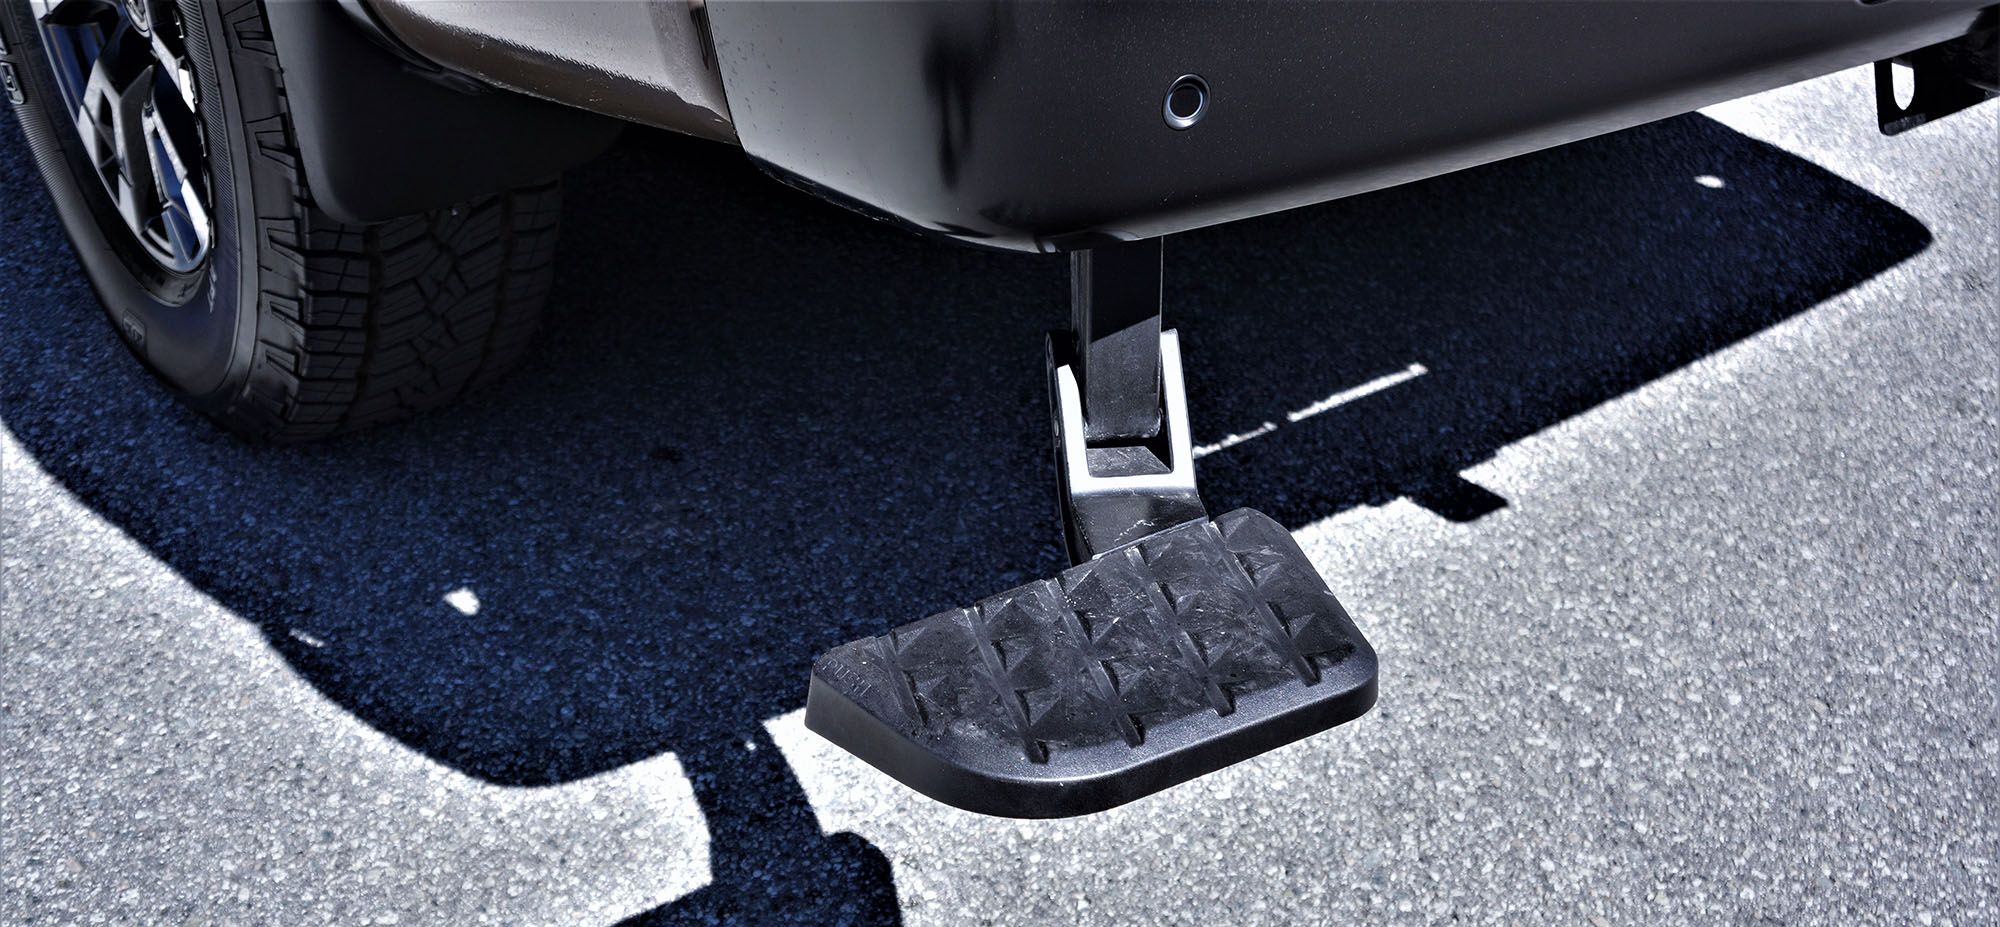 2022 Nissan Titan Crew Cab PRO 4X Luxury showing drop-down step for accessing the bed.